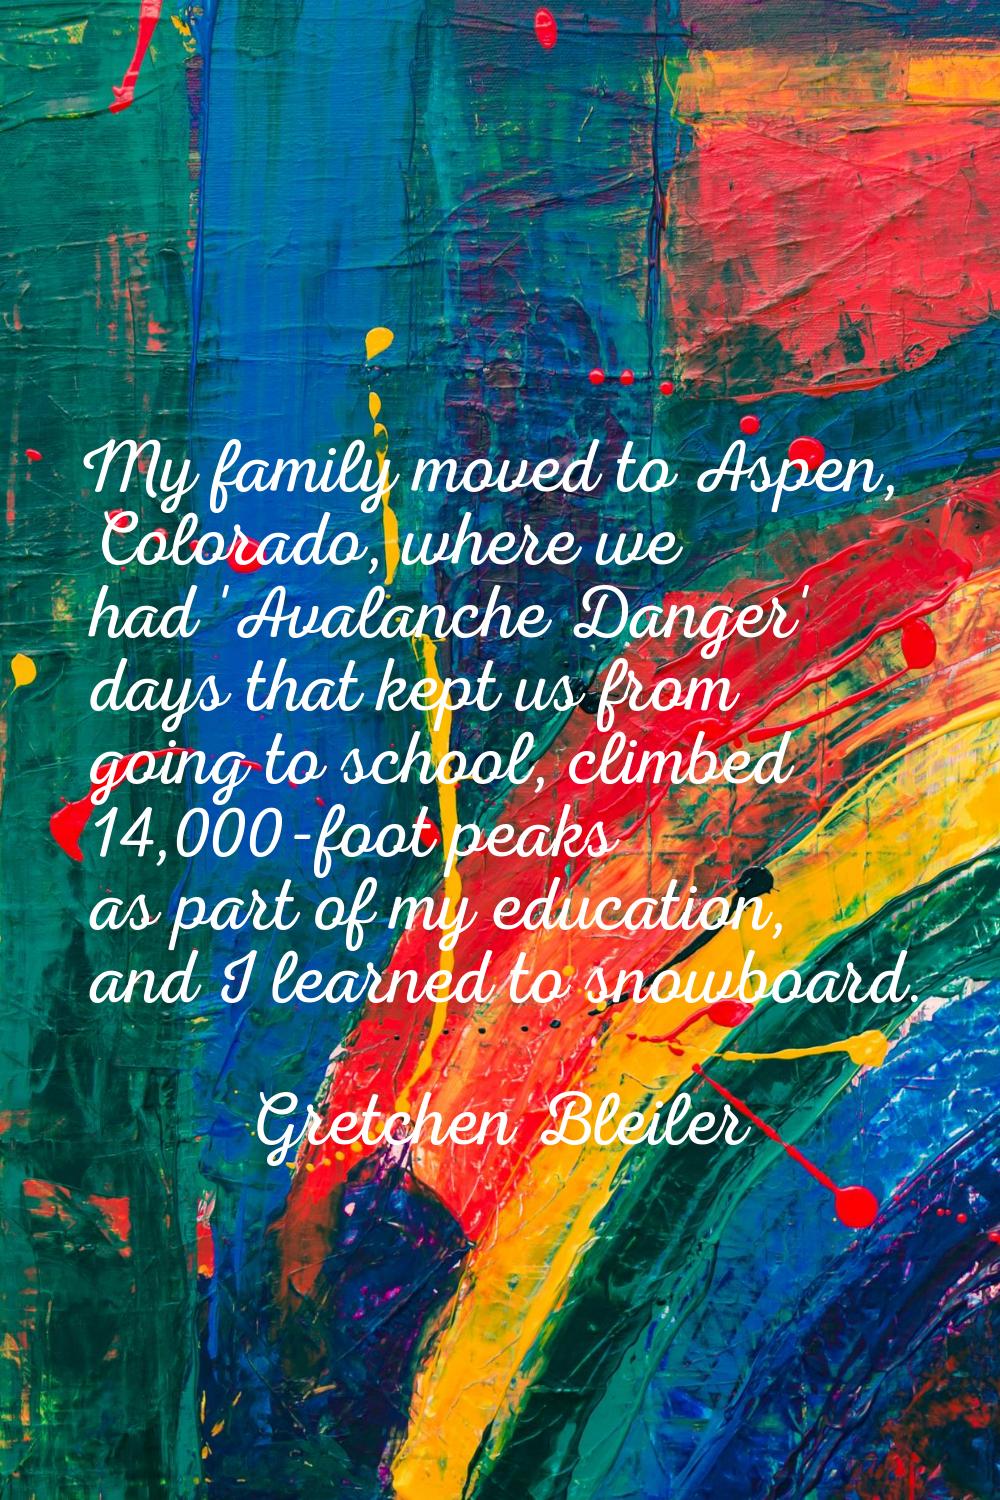 My family moved to Aspen, Colorado, where we had 'Avalanche Danger' days that kept us from going to